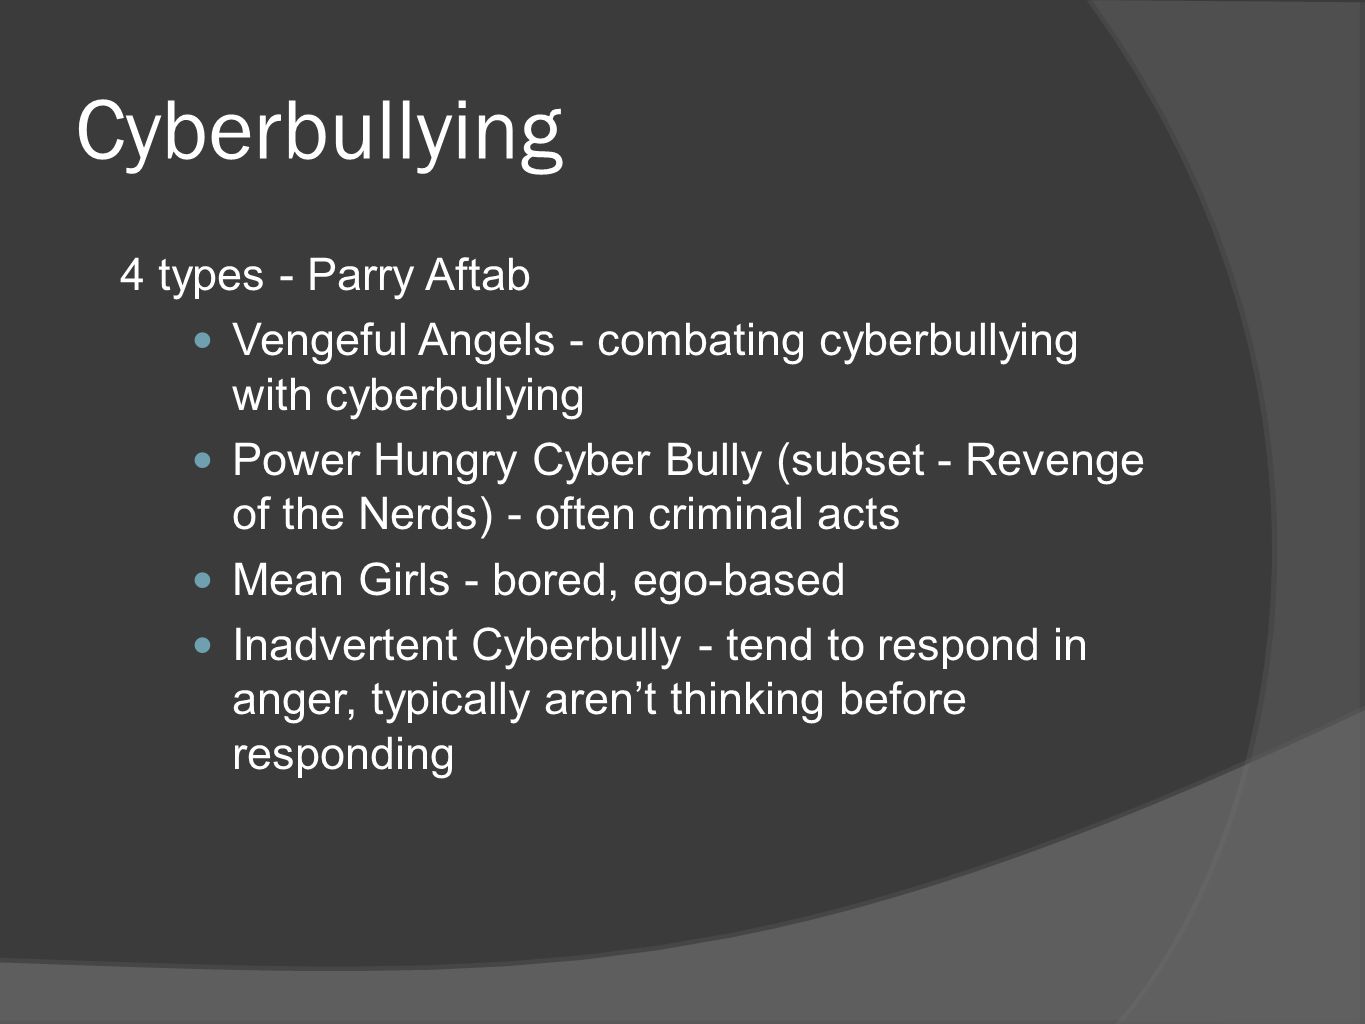 Cyberbullying 4 types - Parry Aftab Vengeful Angels - combating cyberbullying with cyberbullying Power Hungry Cyber Bully (subset - Revenge of the Nerds) - often criminal acts Mean Girls - bored, ego-based Inadvertent Cyberbully - tend to respond in anger, typically aren’t thinking before responding